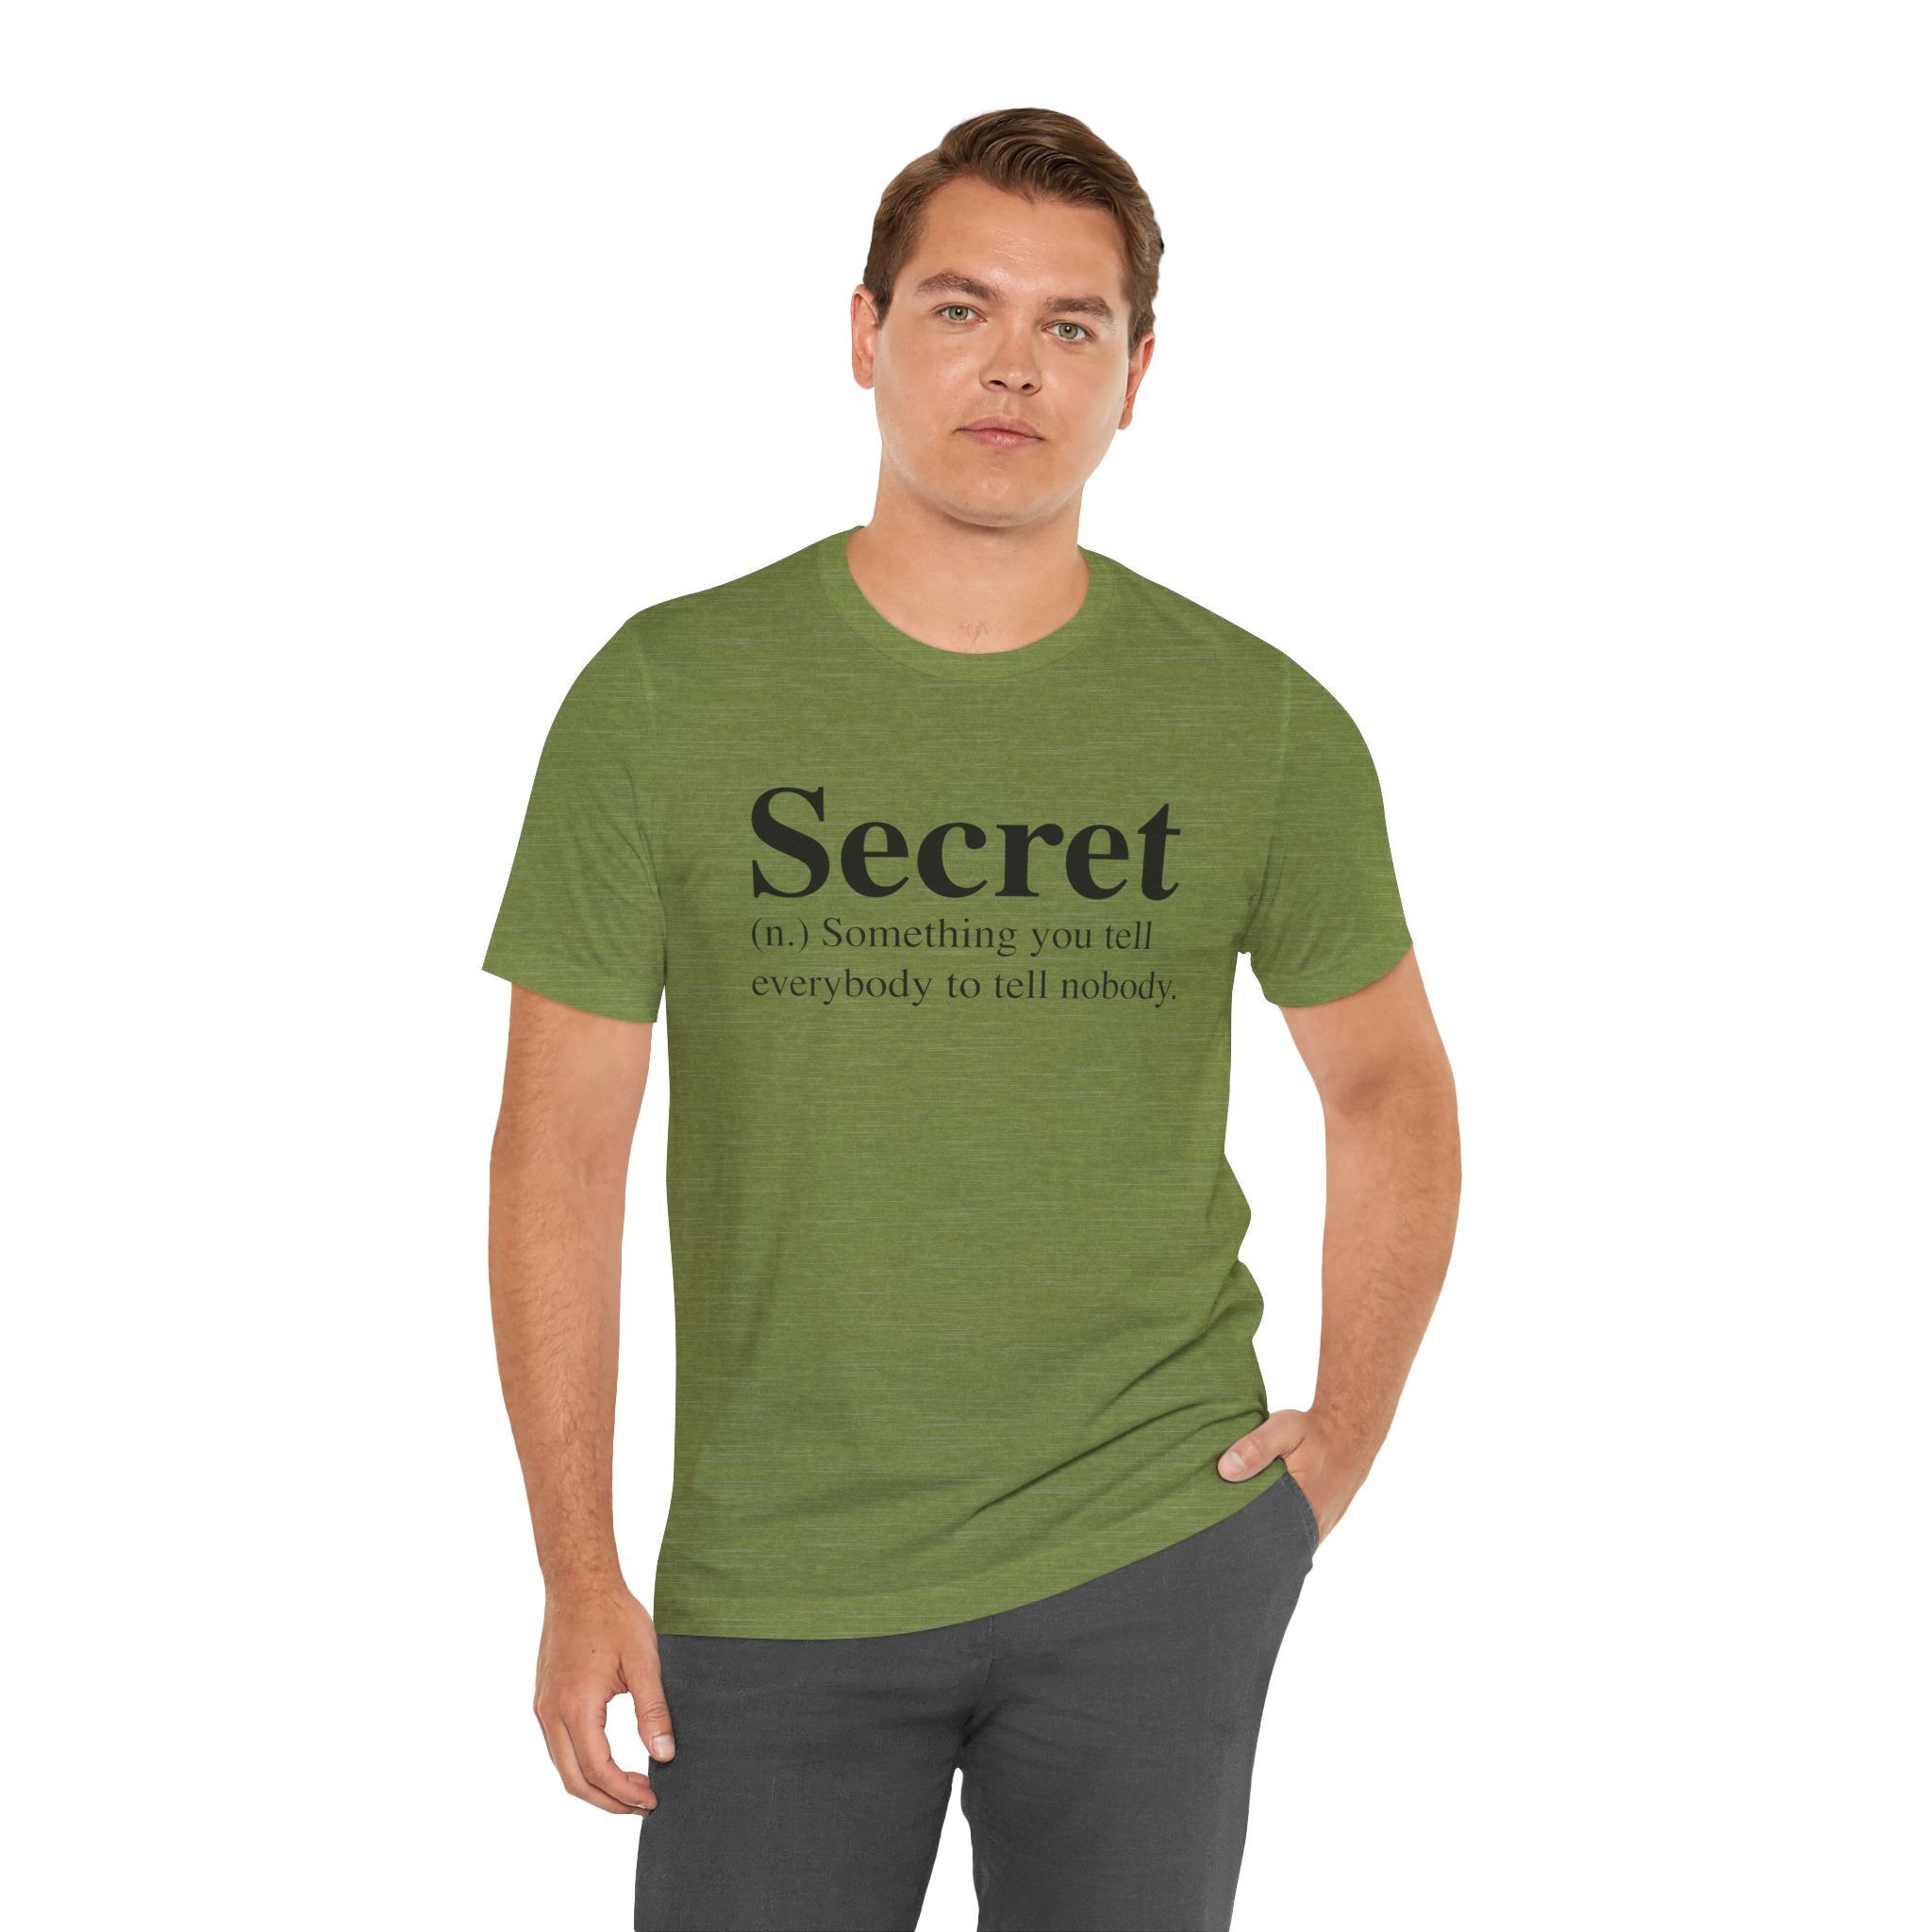 A man in a Secret T - Shirt with the word "secret" and its definition printed on it, standing against a white background.